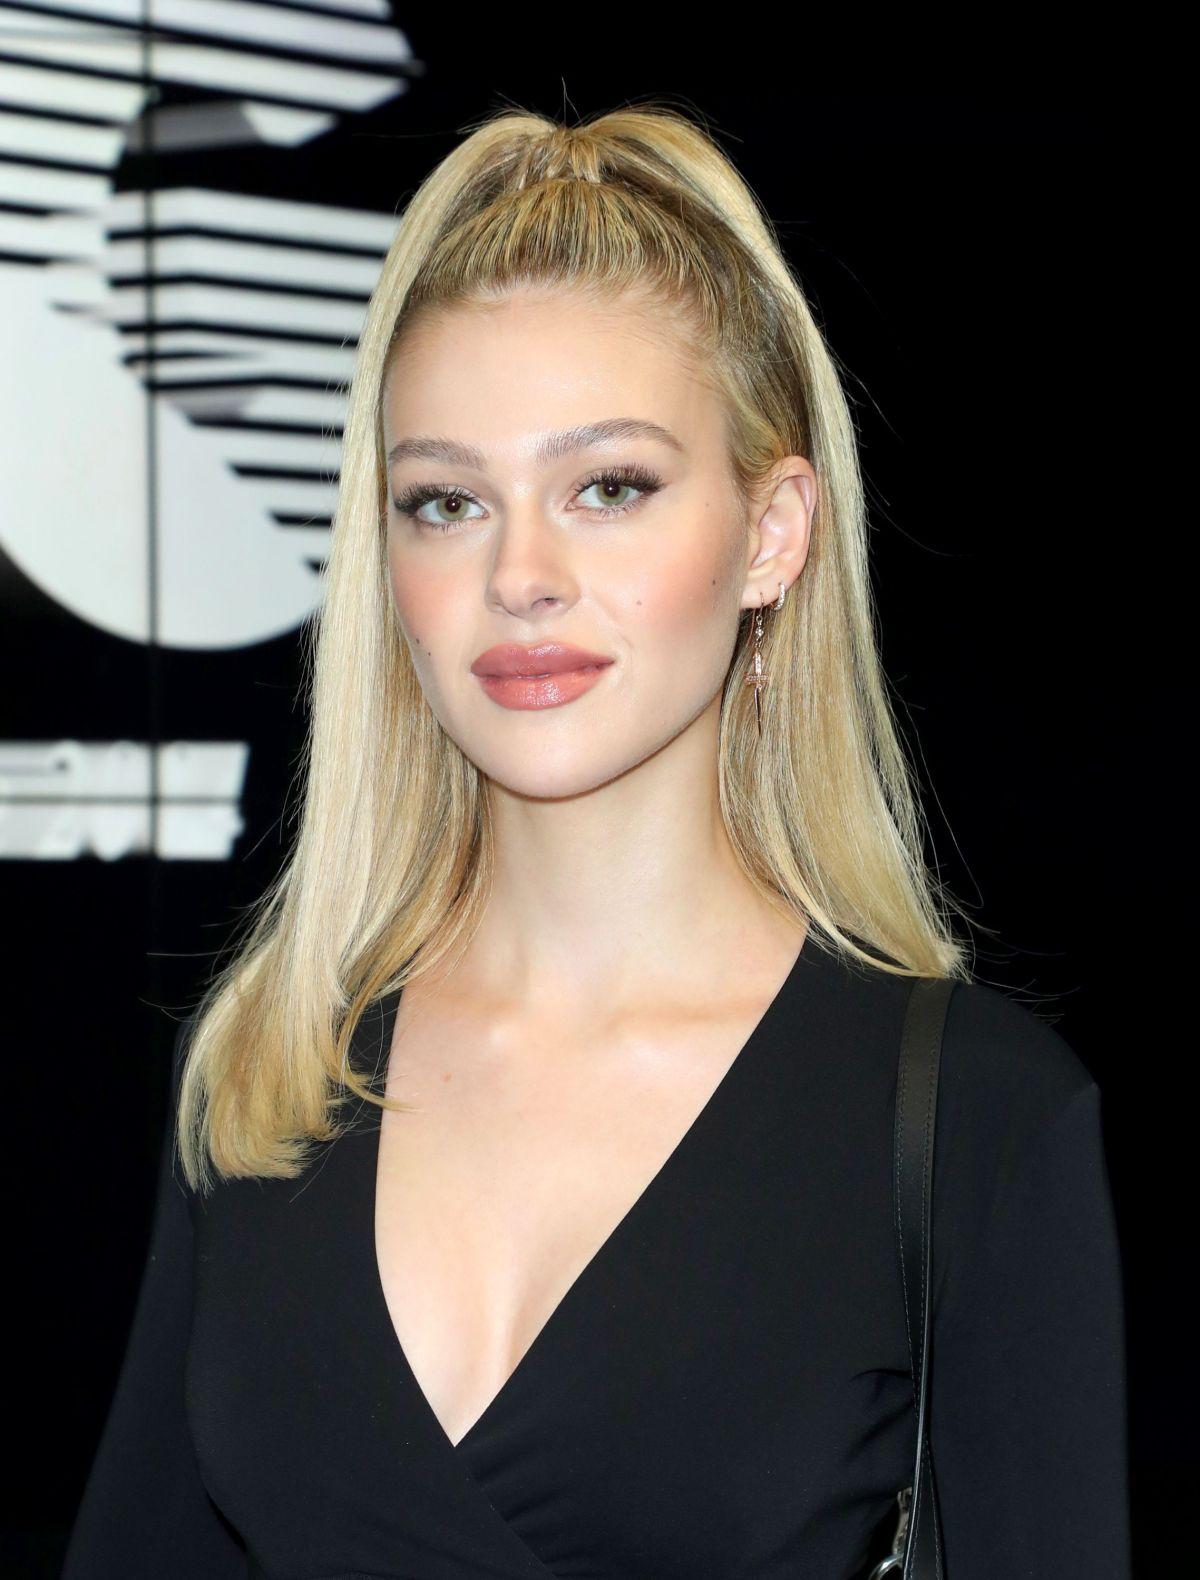 55 Hot Pictures Of Nicola Peltz Will Drive You Insane For Her 6